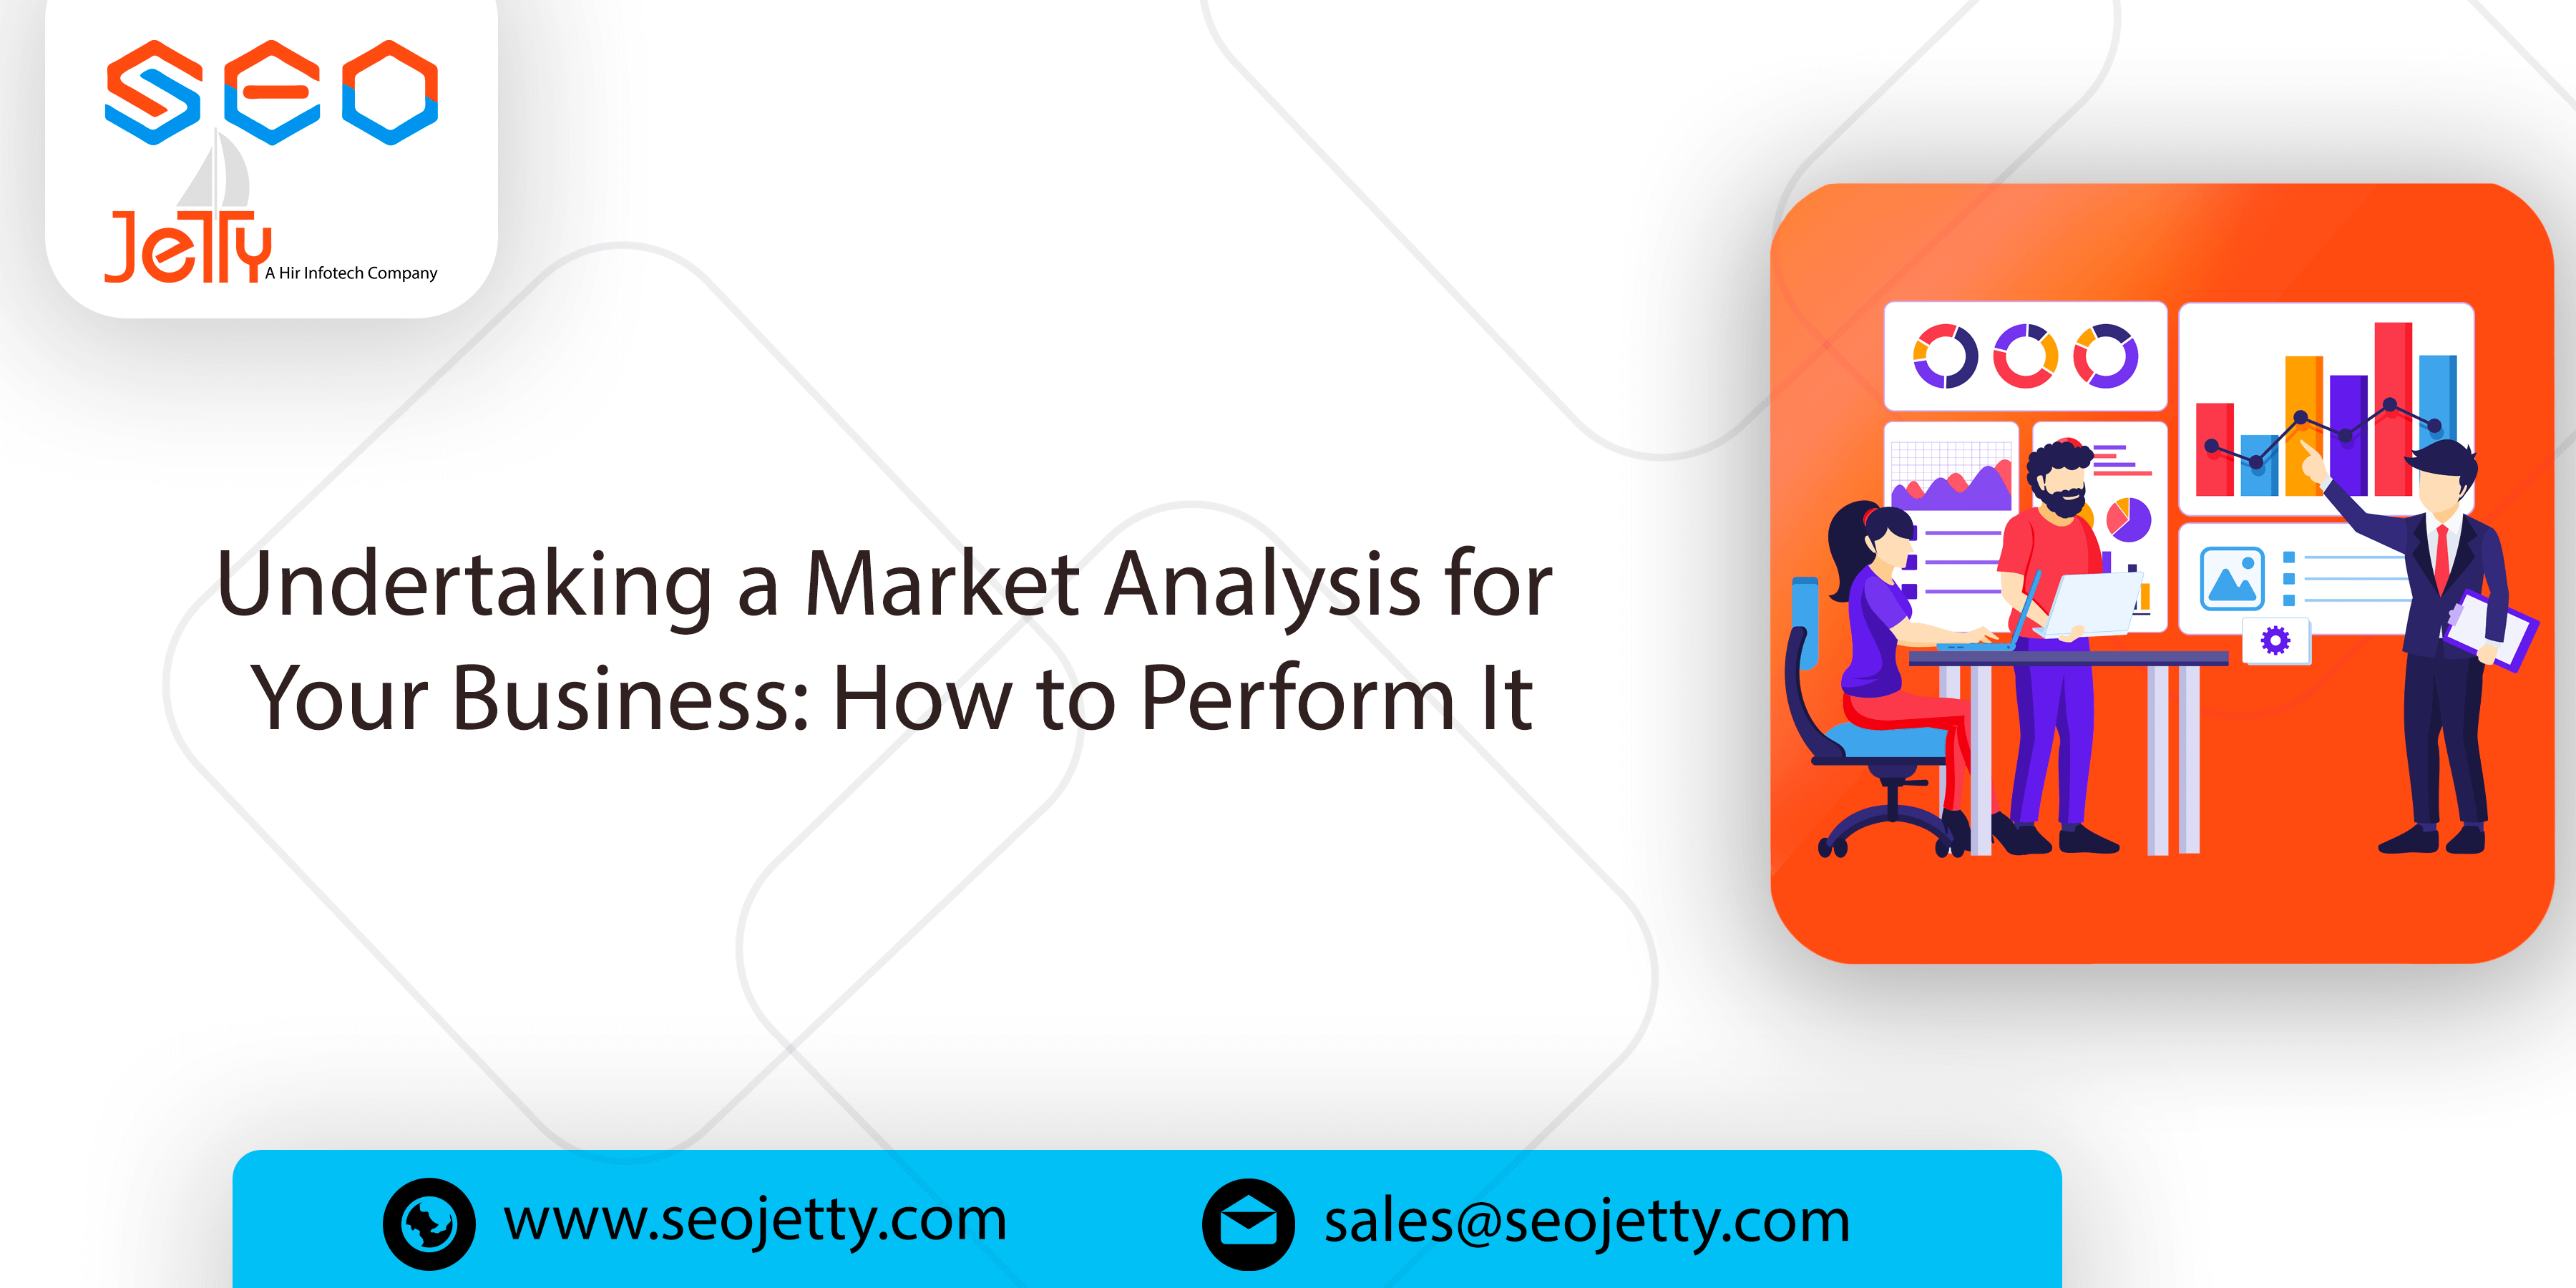 Undertaking a Market Analysis for Your Business: How to Perform It